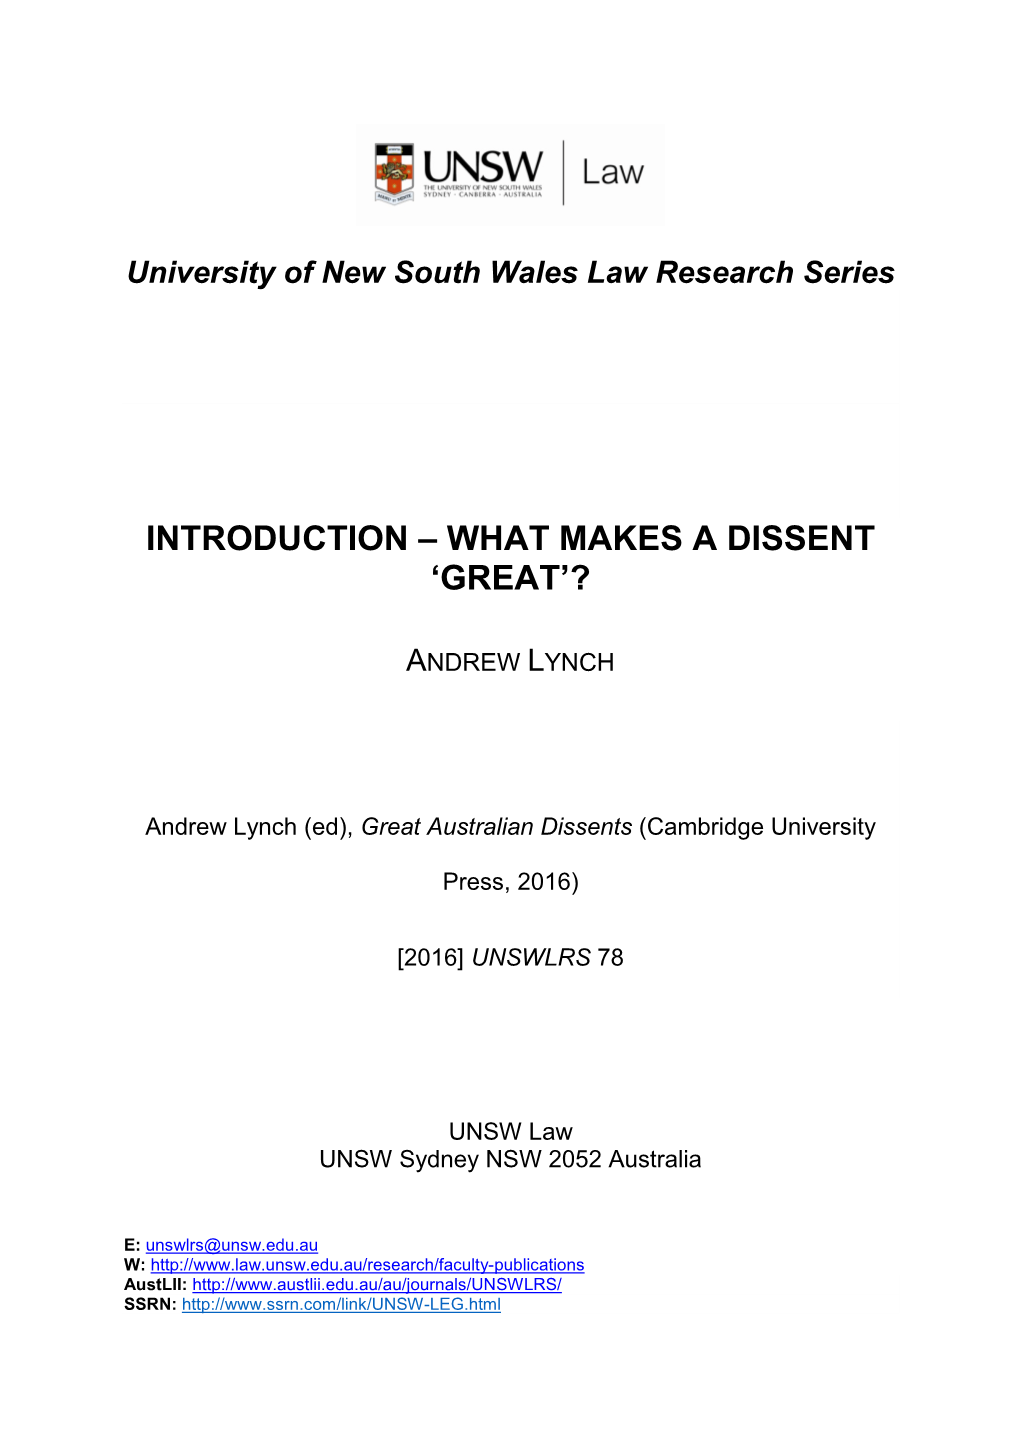 Introduction – What Makes a Dissent 'Great'?